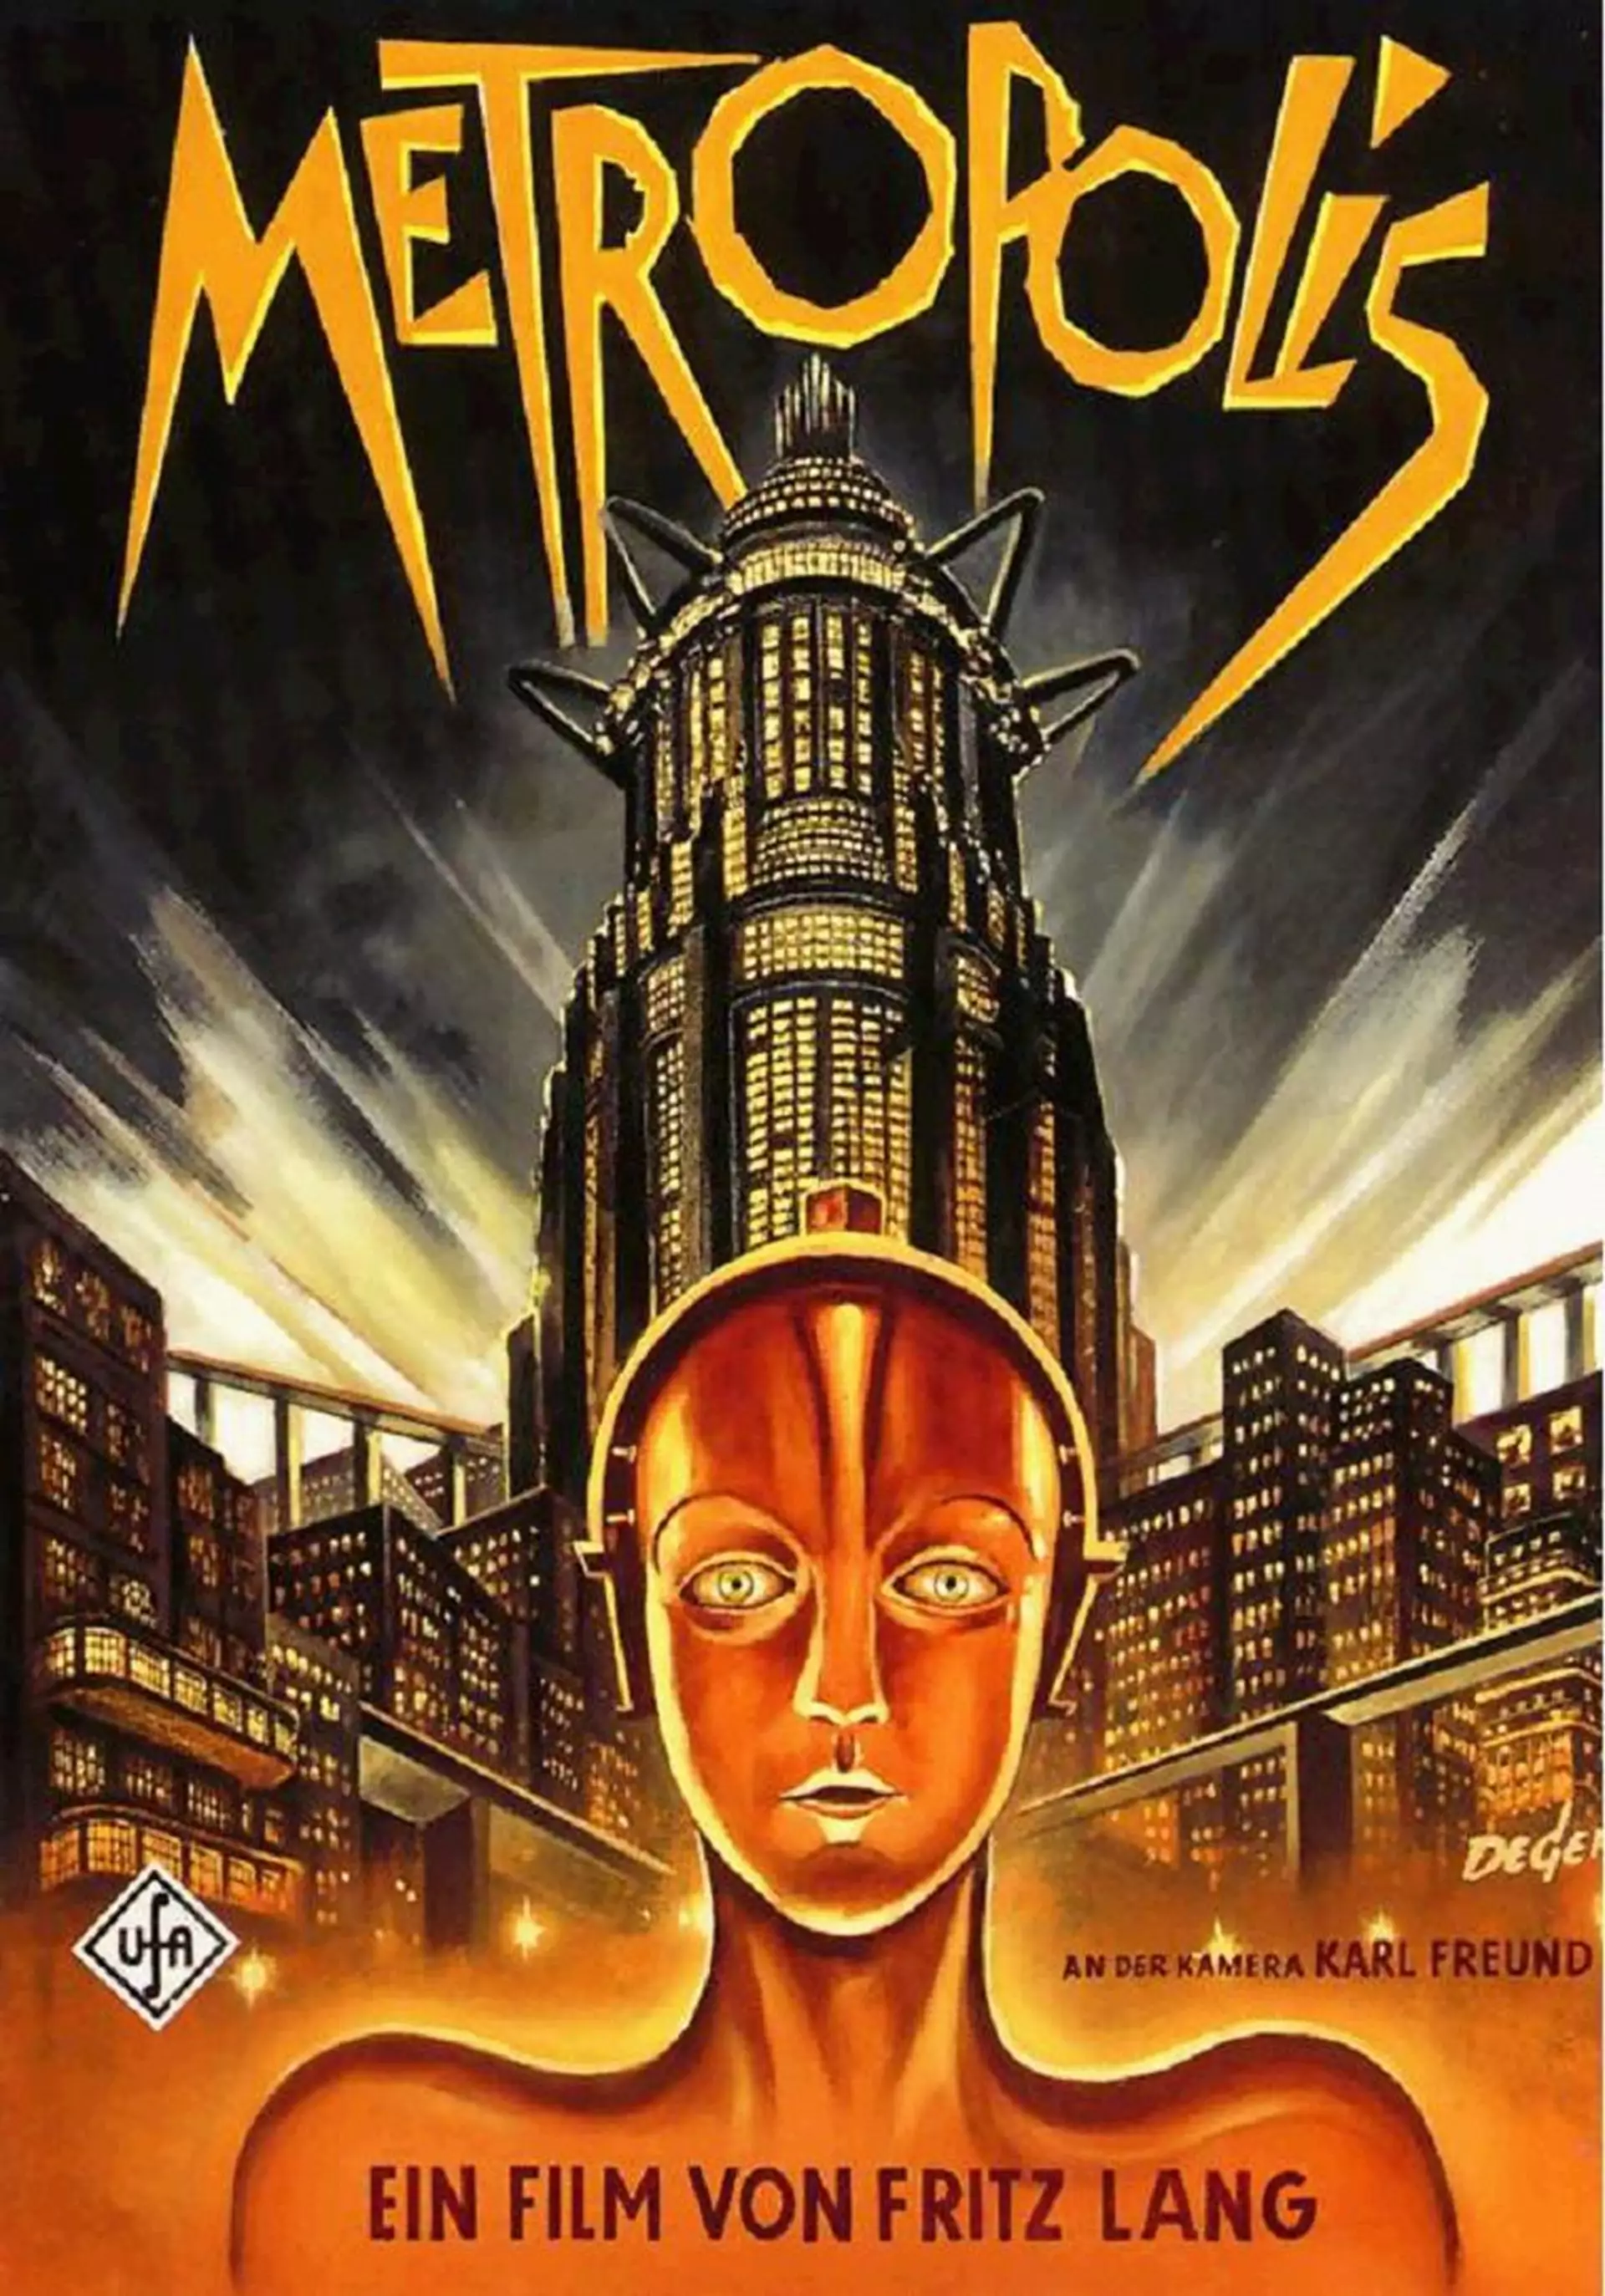 The poster for Metropolis.